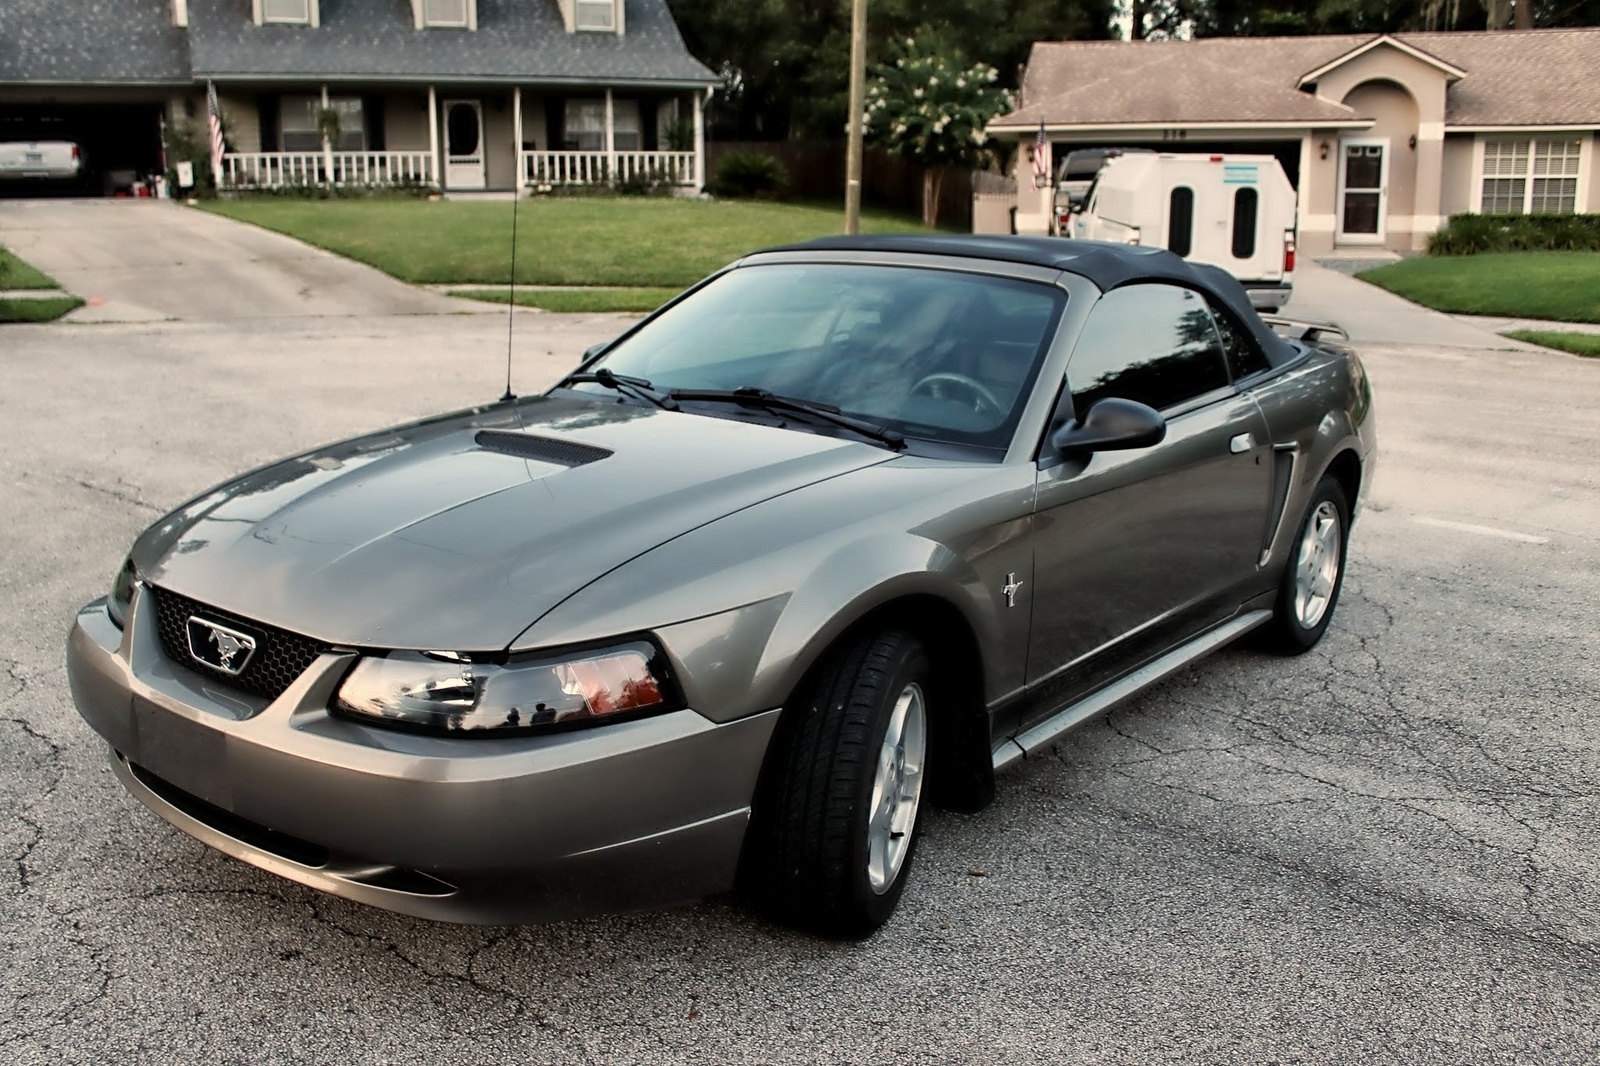 2002 Ford mustang gt deluxe convertible #2